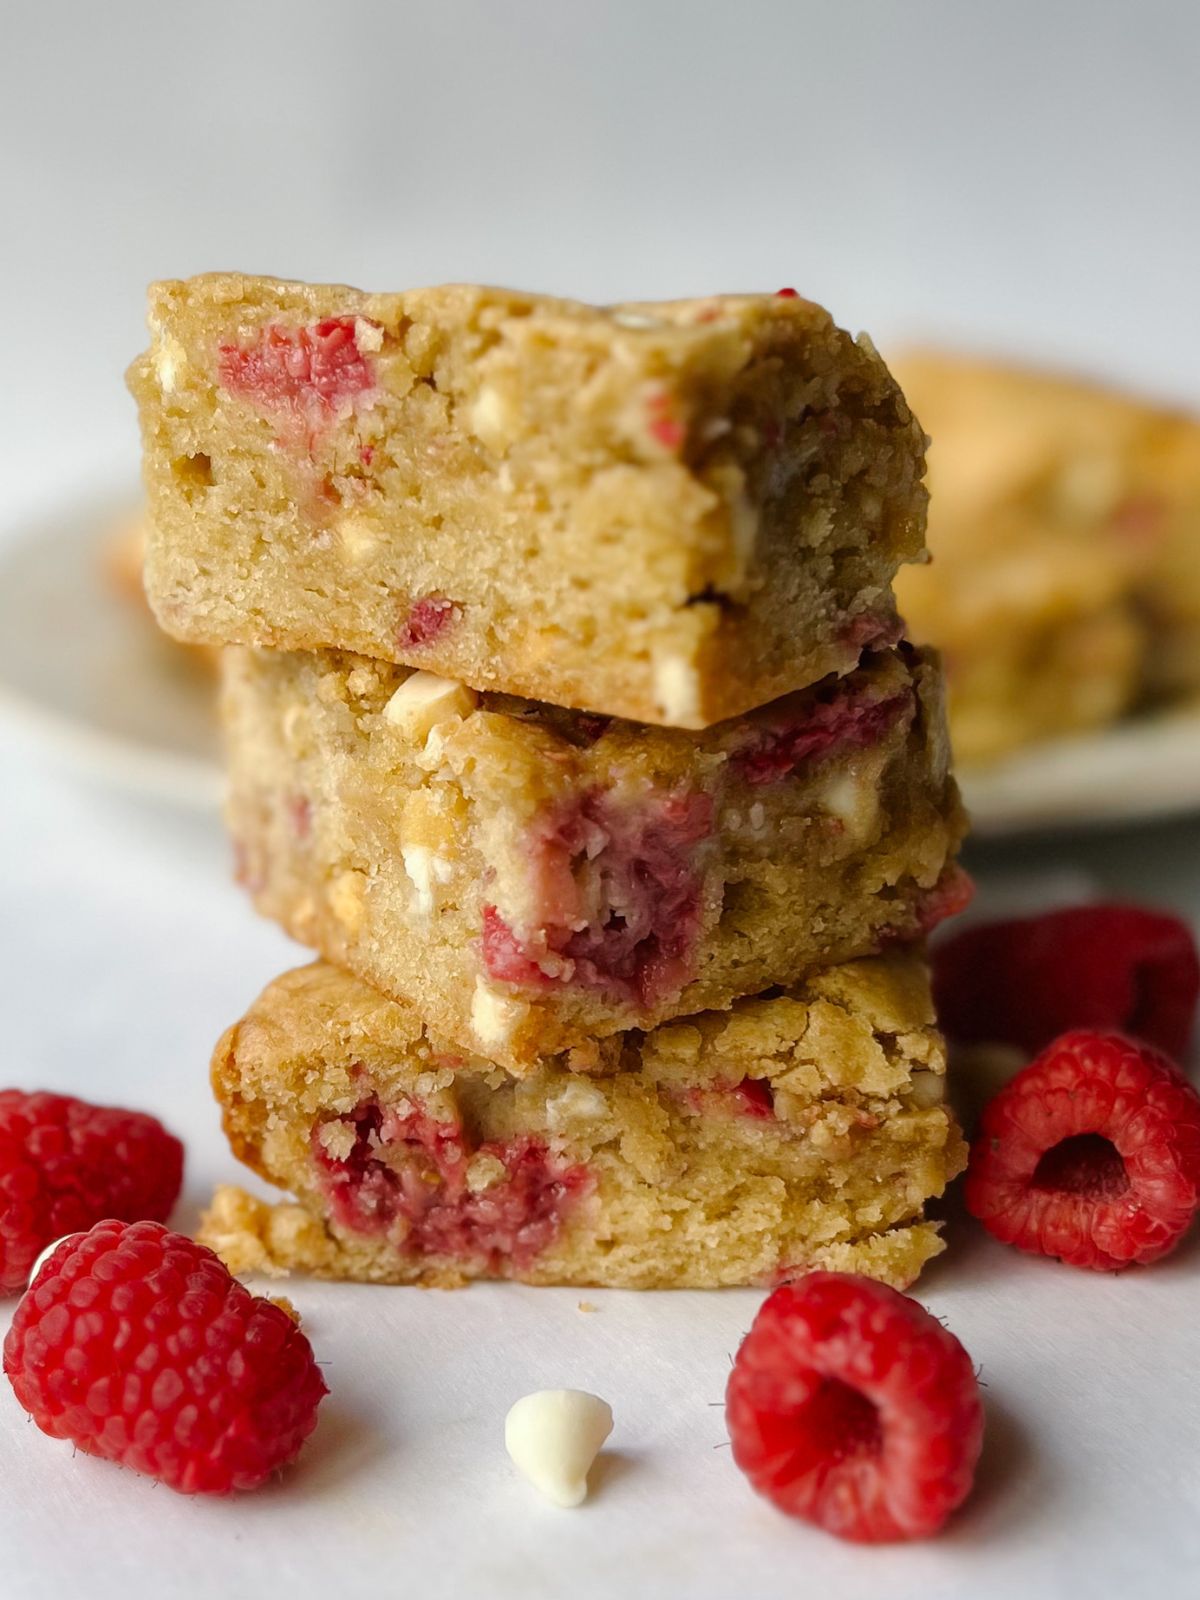 Three white chocolate raspberry blondies stacked on top of each other with a plate of more blondies in the background.